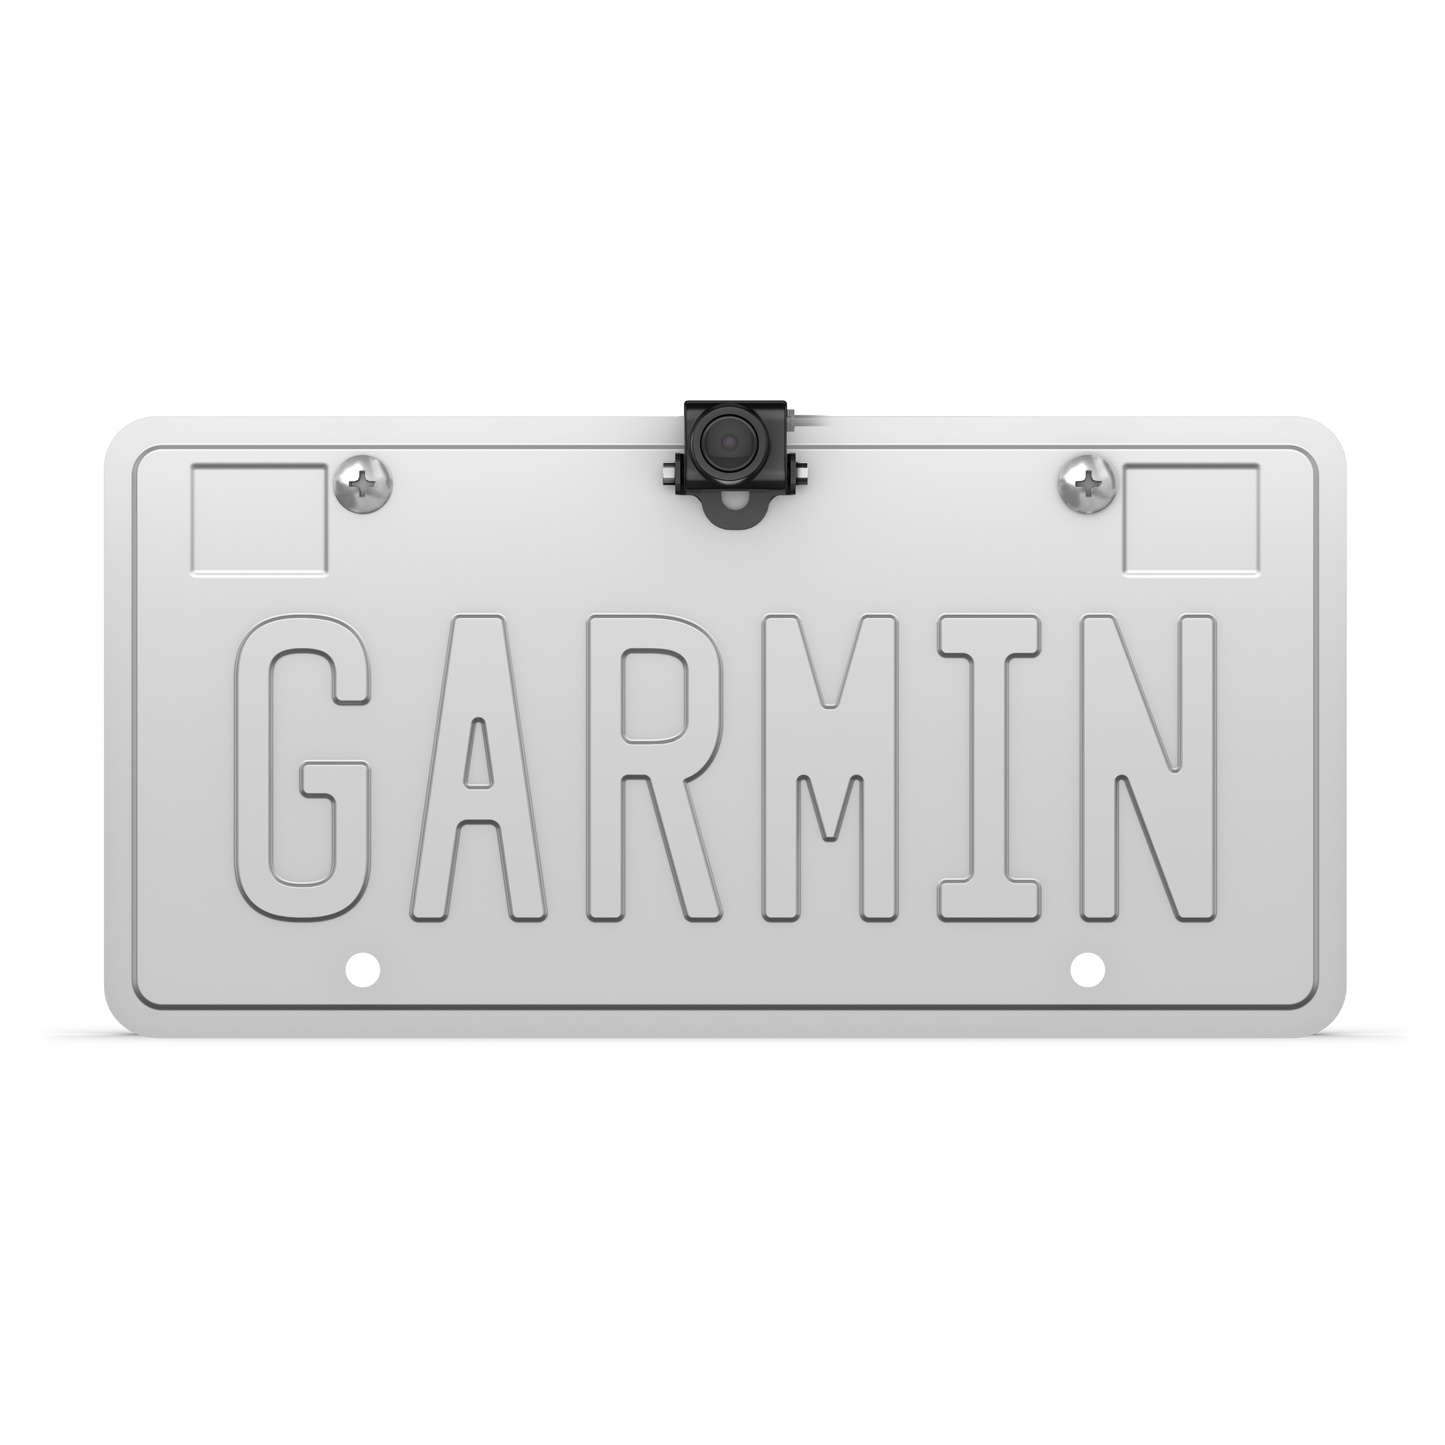 Garmin BC 50 Wireless Backup Camera with License Plate Mount (010-02609-00) - KBM Outdoors